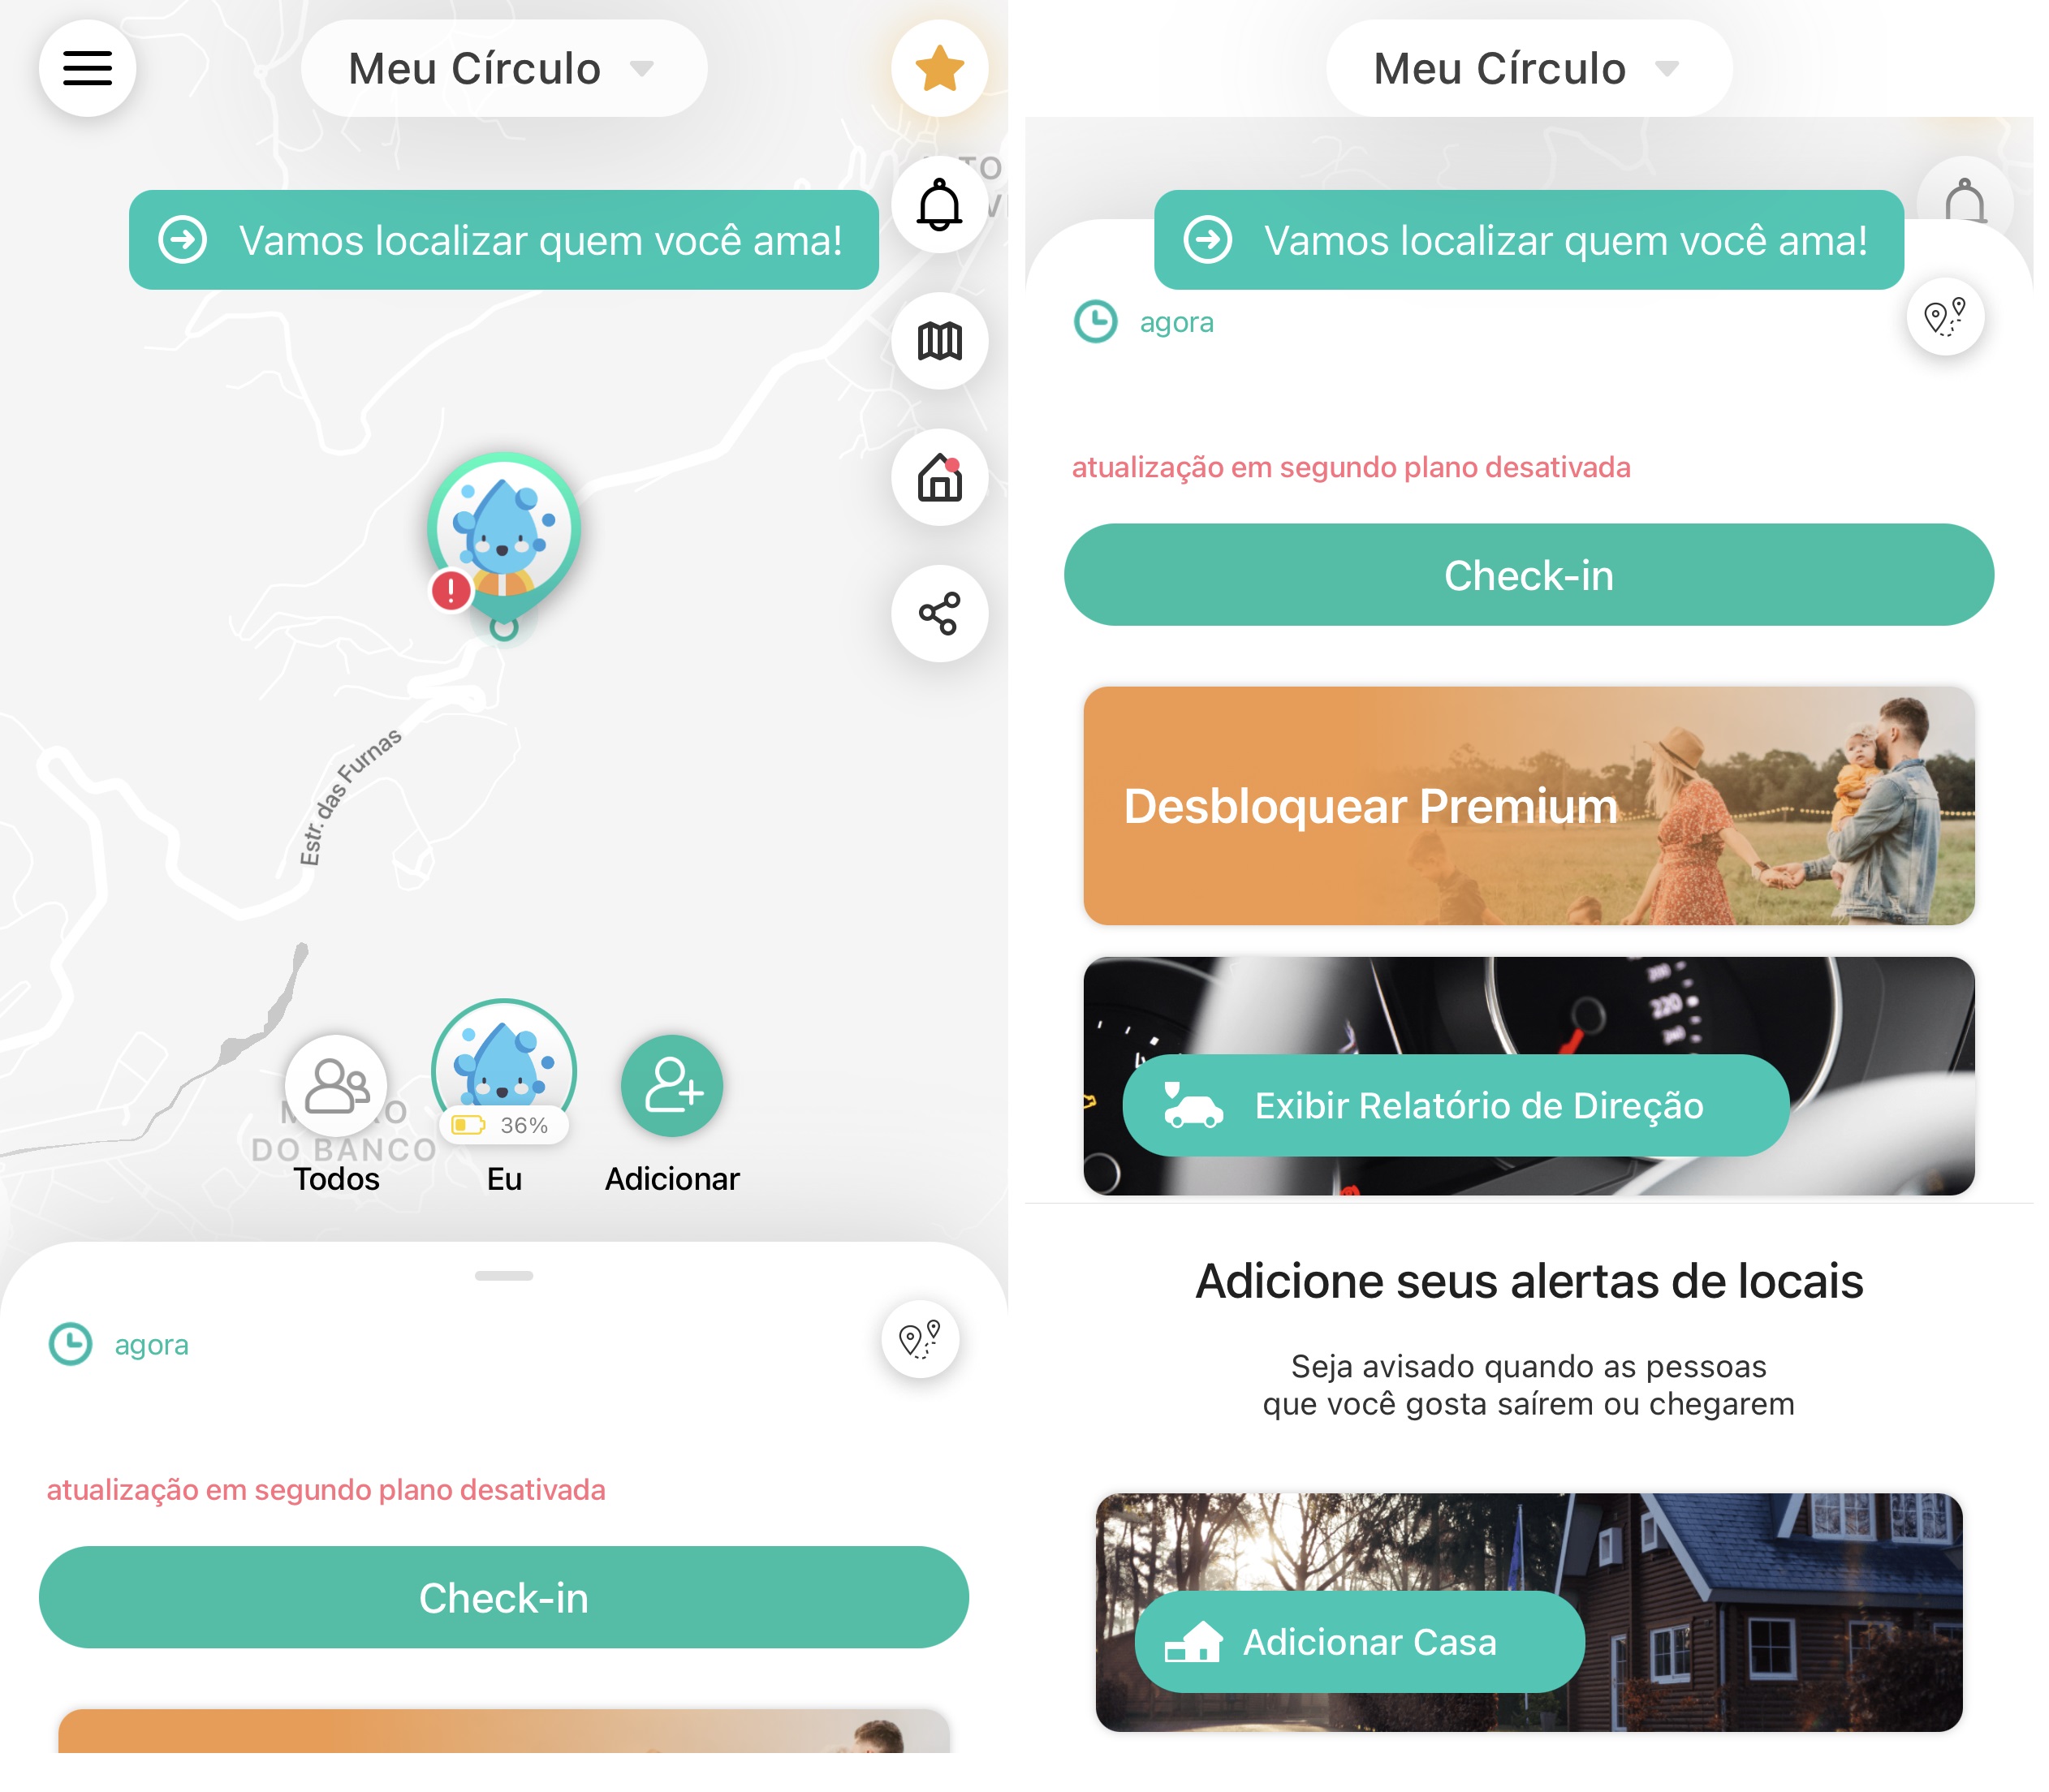 GeoZilla issues an alert when a person in your circle leaves or arrives at a registered location